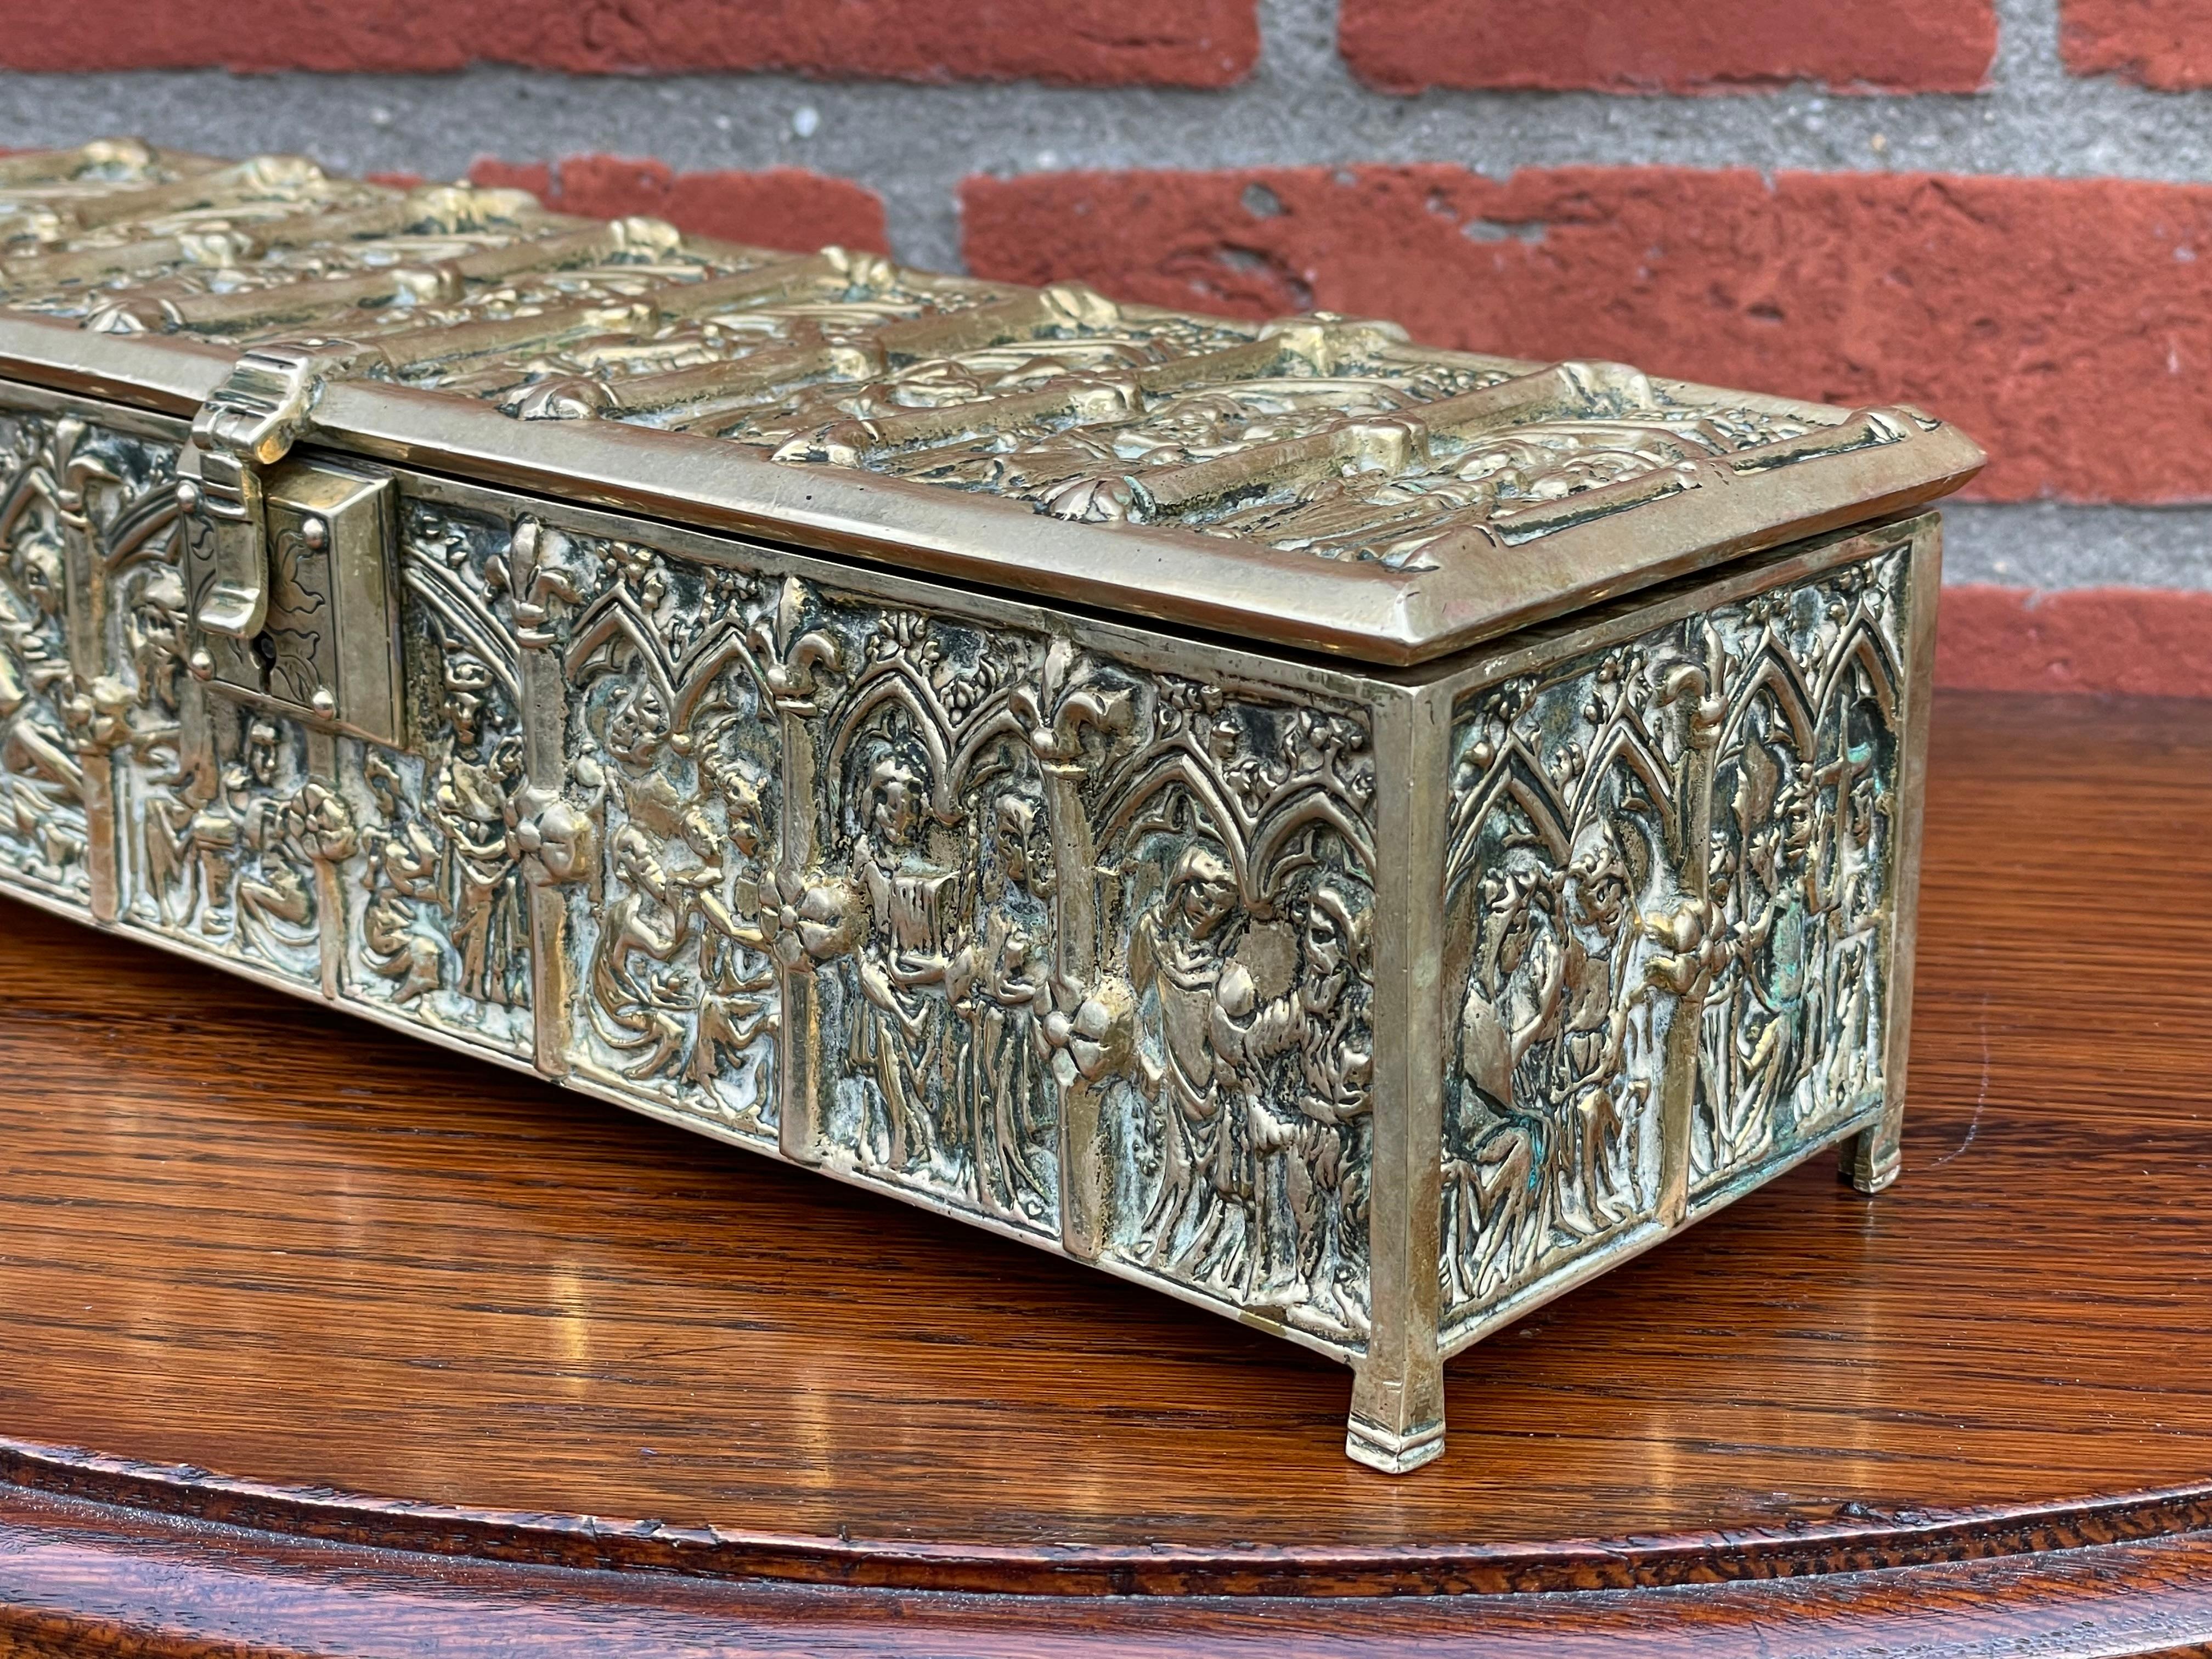 Patinated Antique Bronze Box with Gothic Church Window Panels by Adolph Frankau&Co, London For Sale